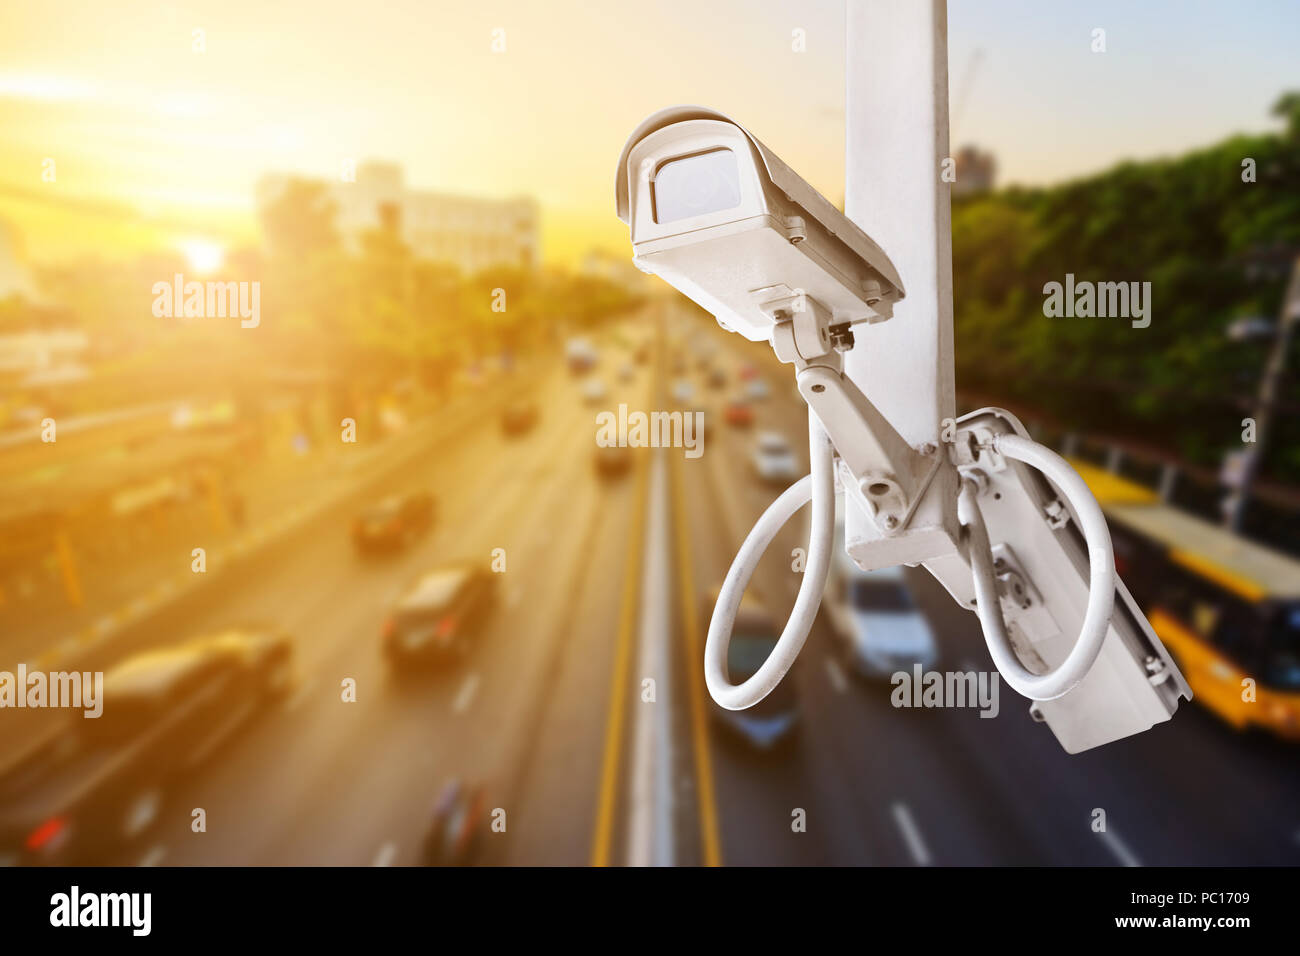 traffic security camera surveillance (CCTV) on road in the city Stock Photo